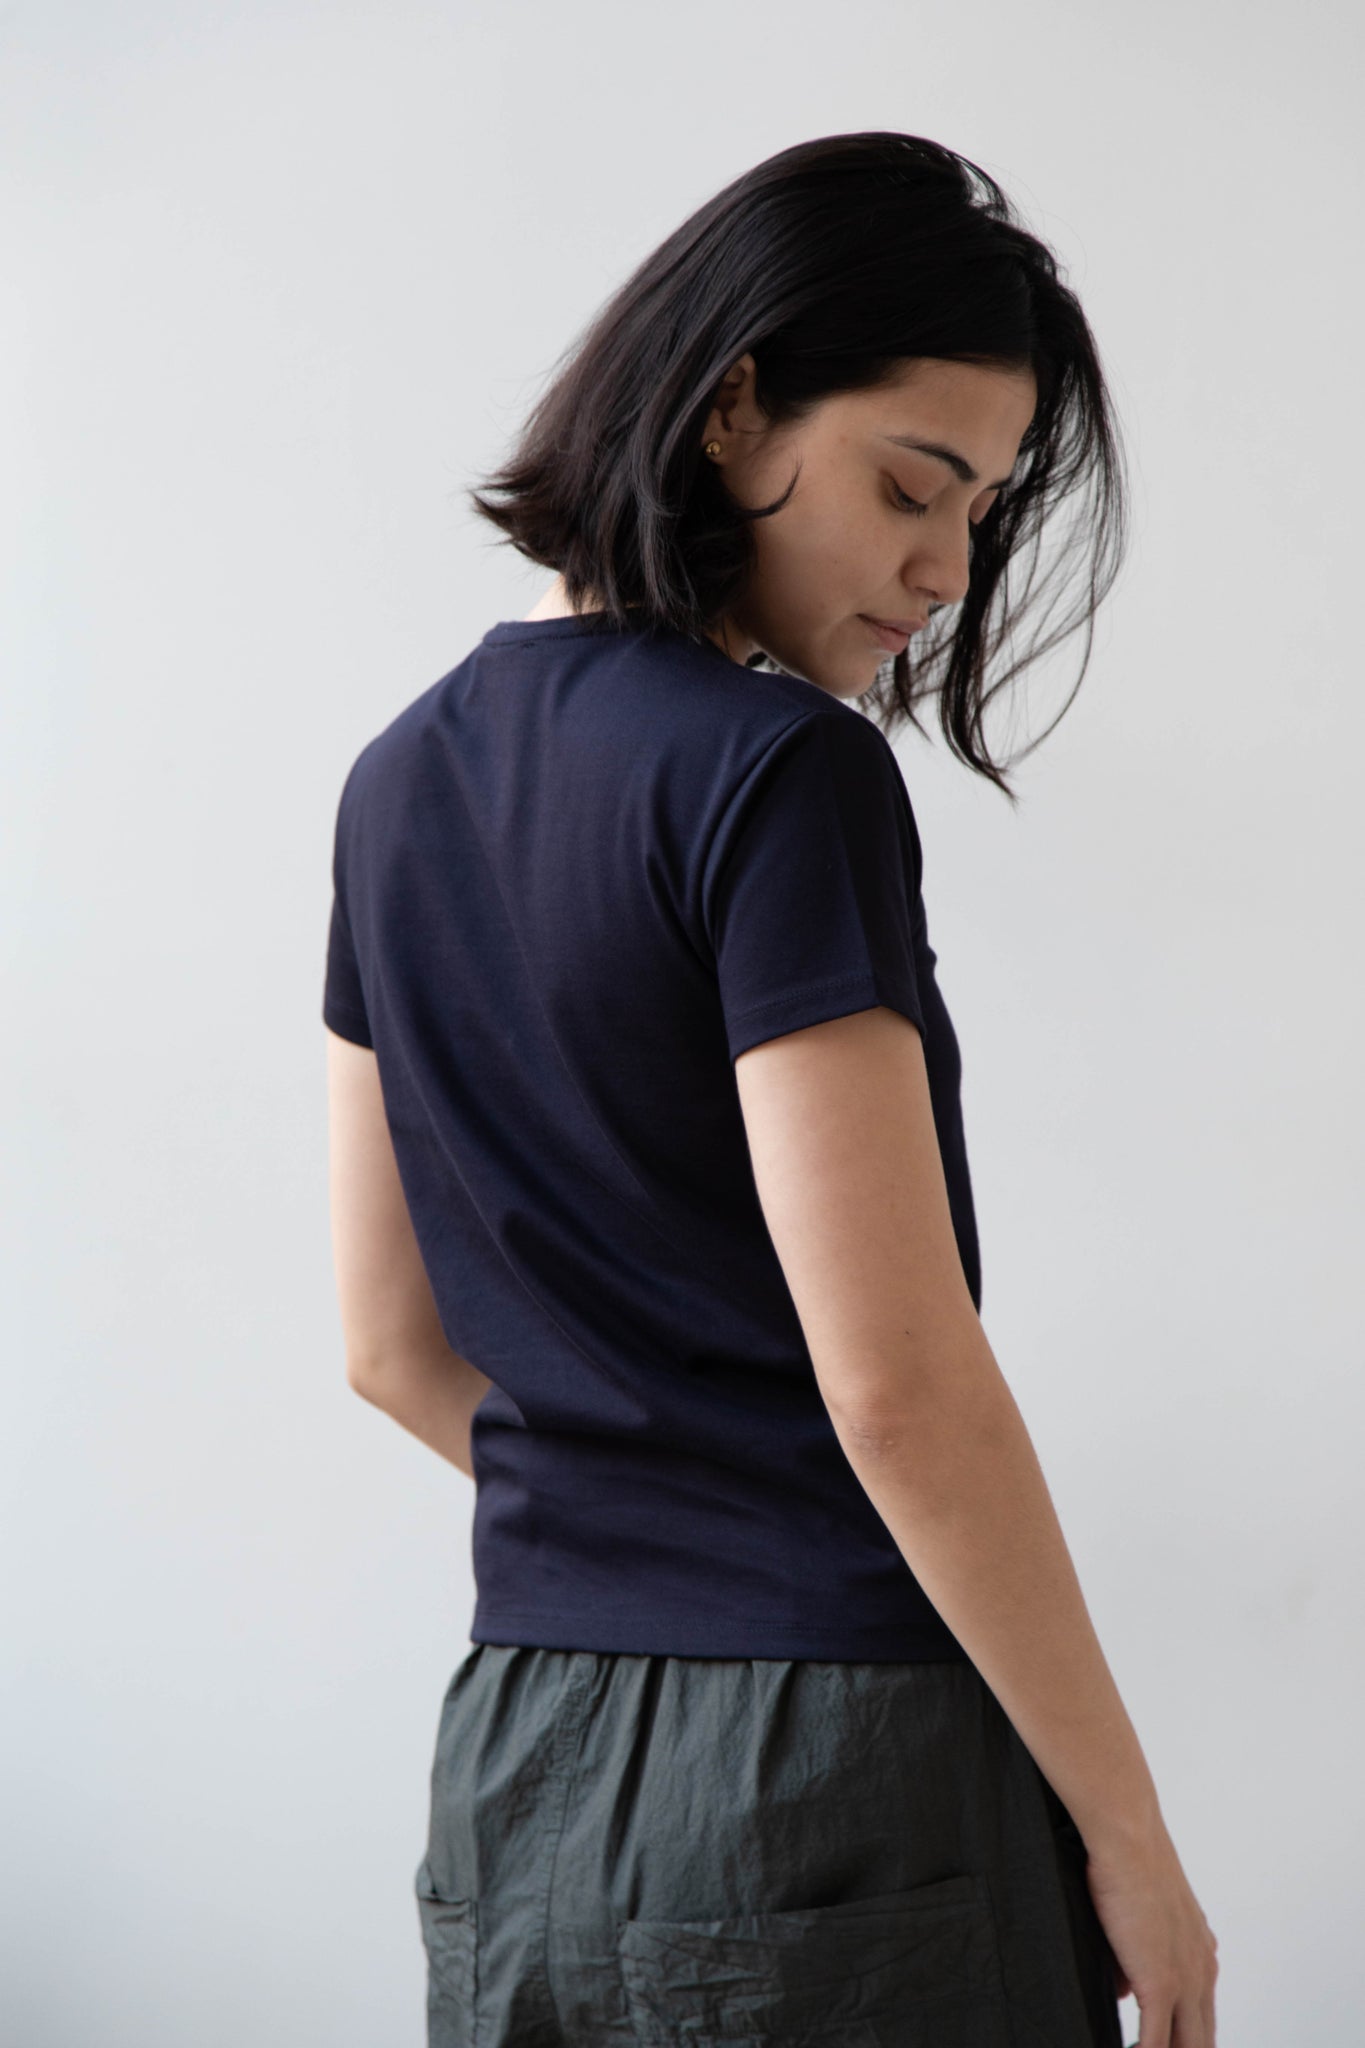 Le 17 Septembre | Round Neck T-Shirt in Navy